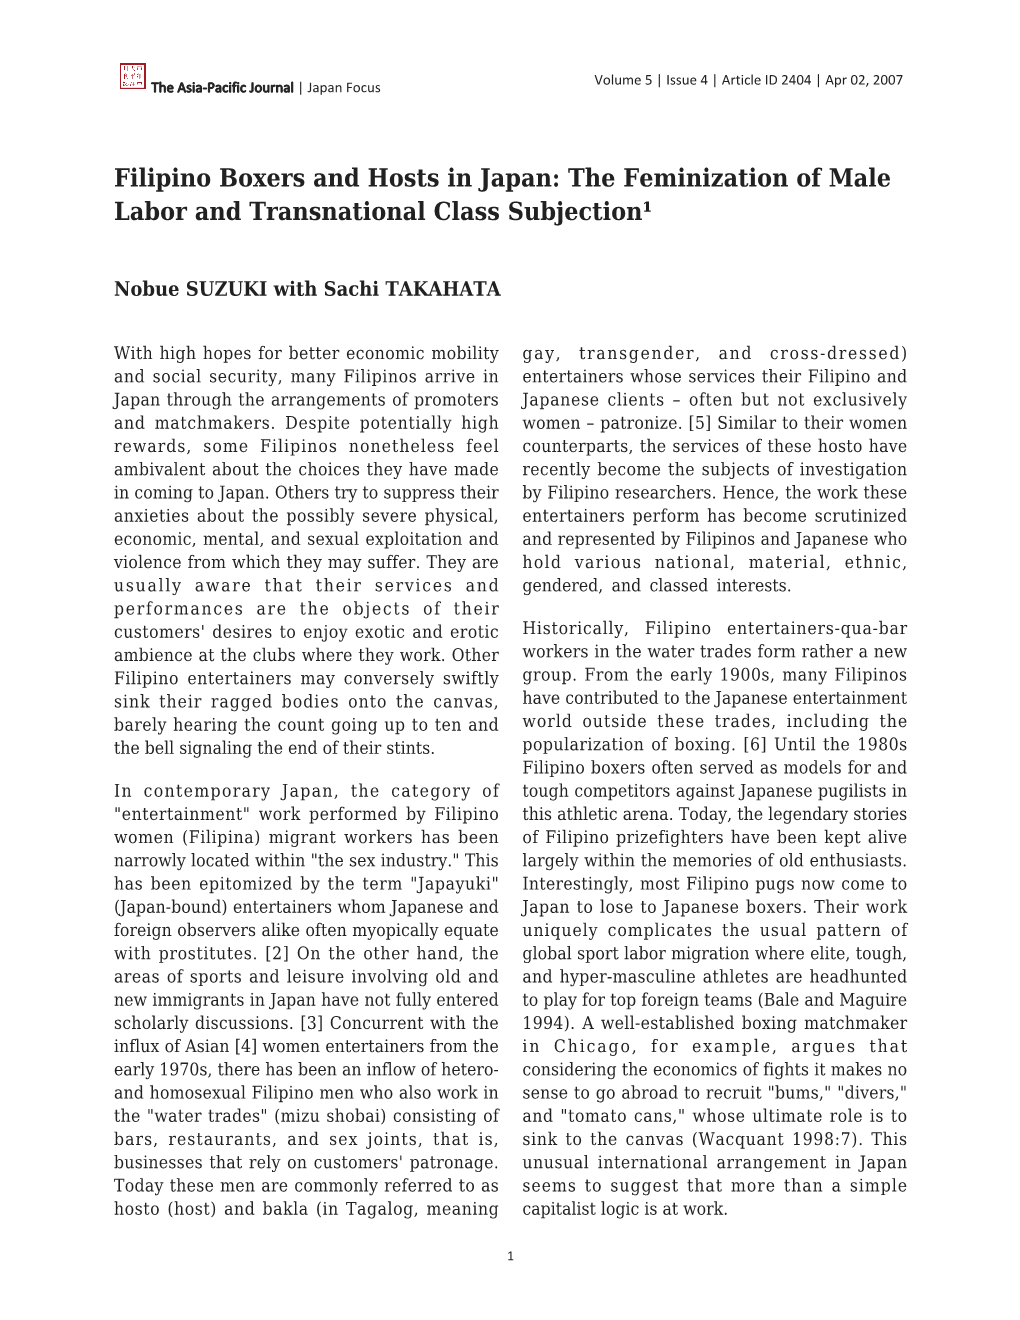 Filipino Boxers and Hosts in Japan: the Feminization of Male Labor and Transnational Class Subjection¹